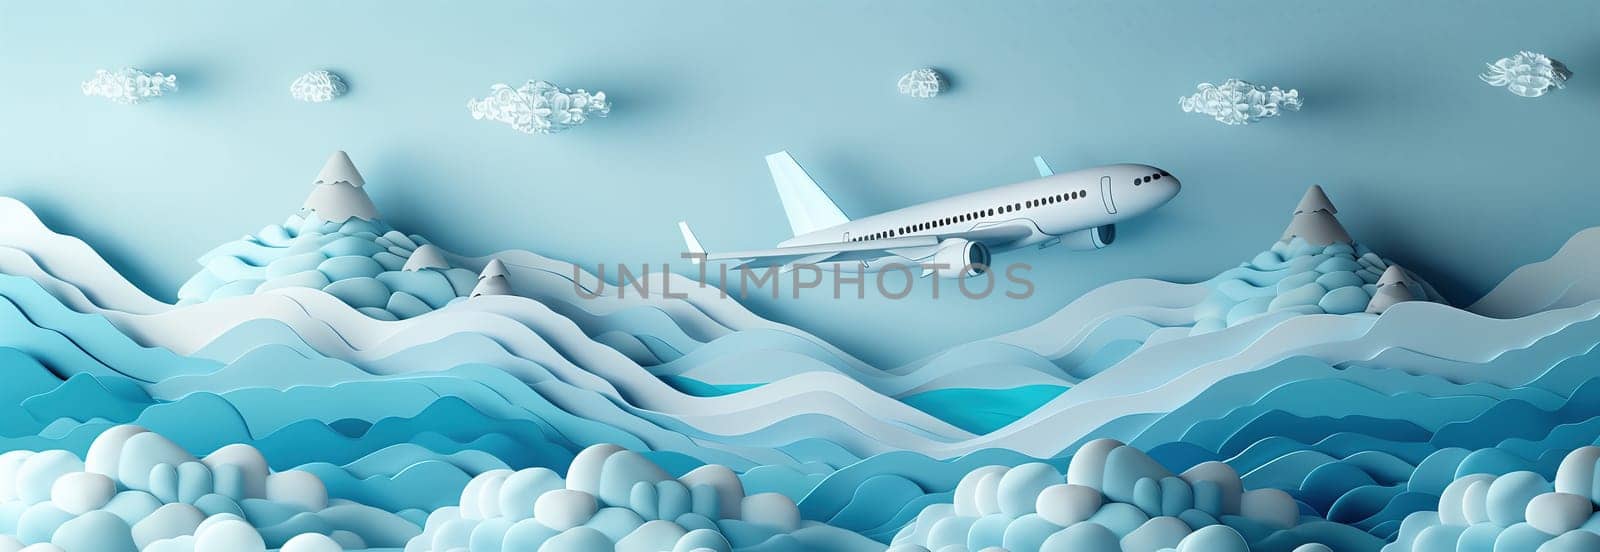 Airplane model on blue background by Andelov13